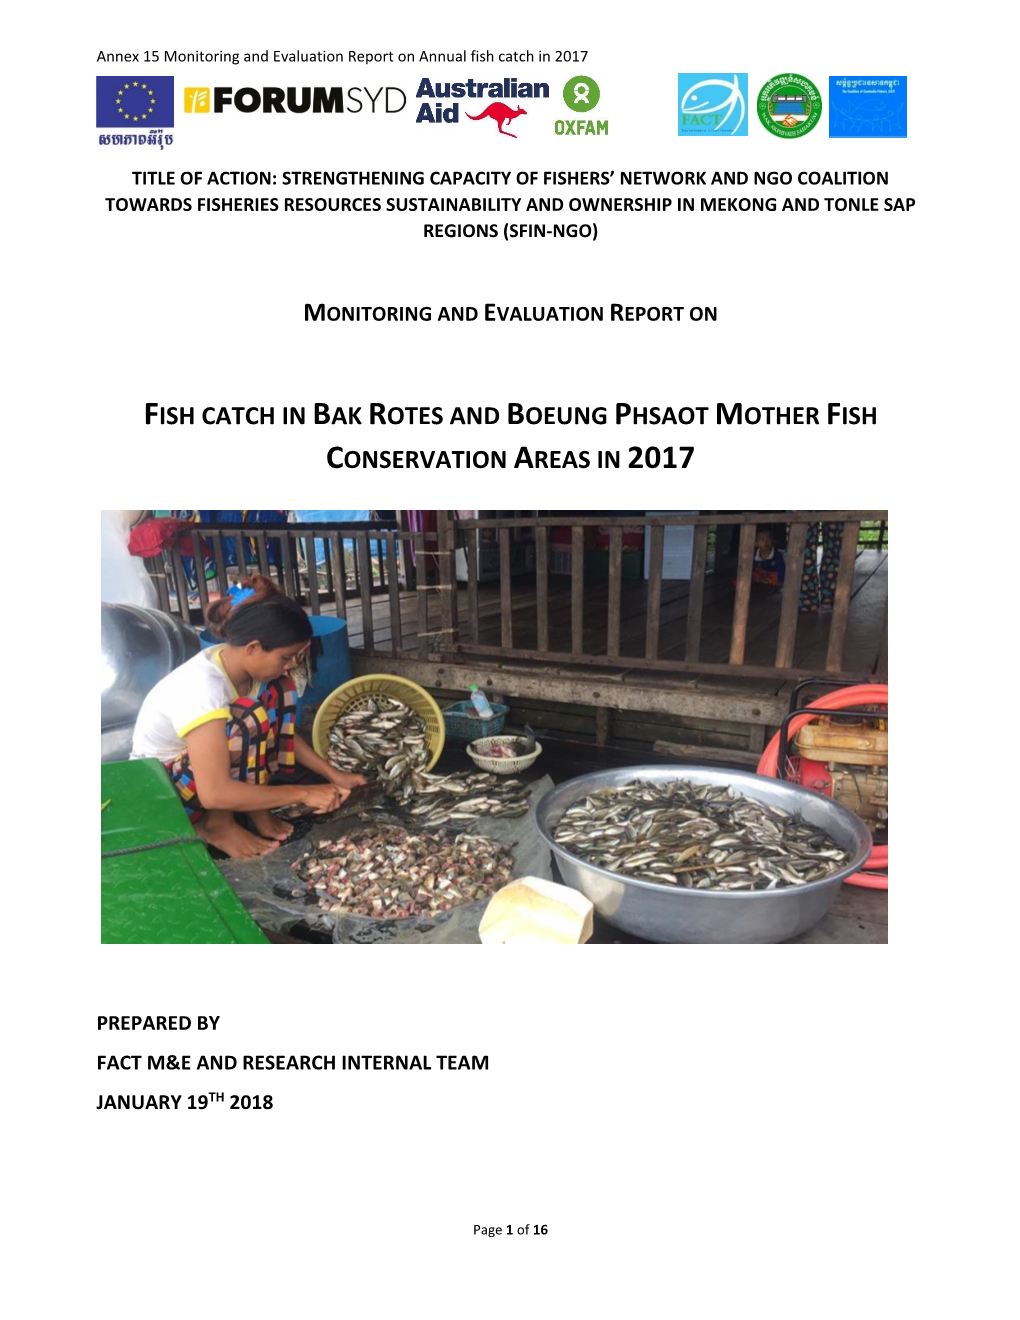 Fish Catch in Bak Rotes and Boeung Phsaot Mother Fish Conservation Areas in 2017